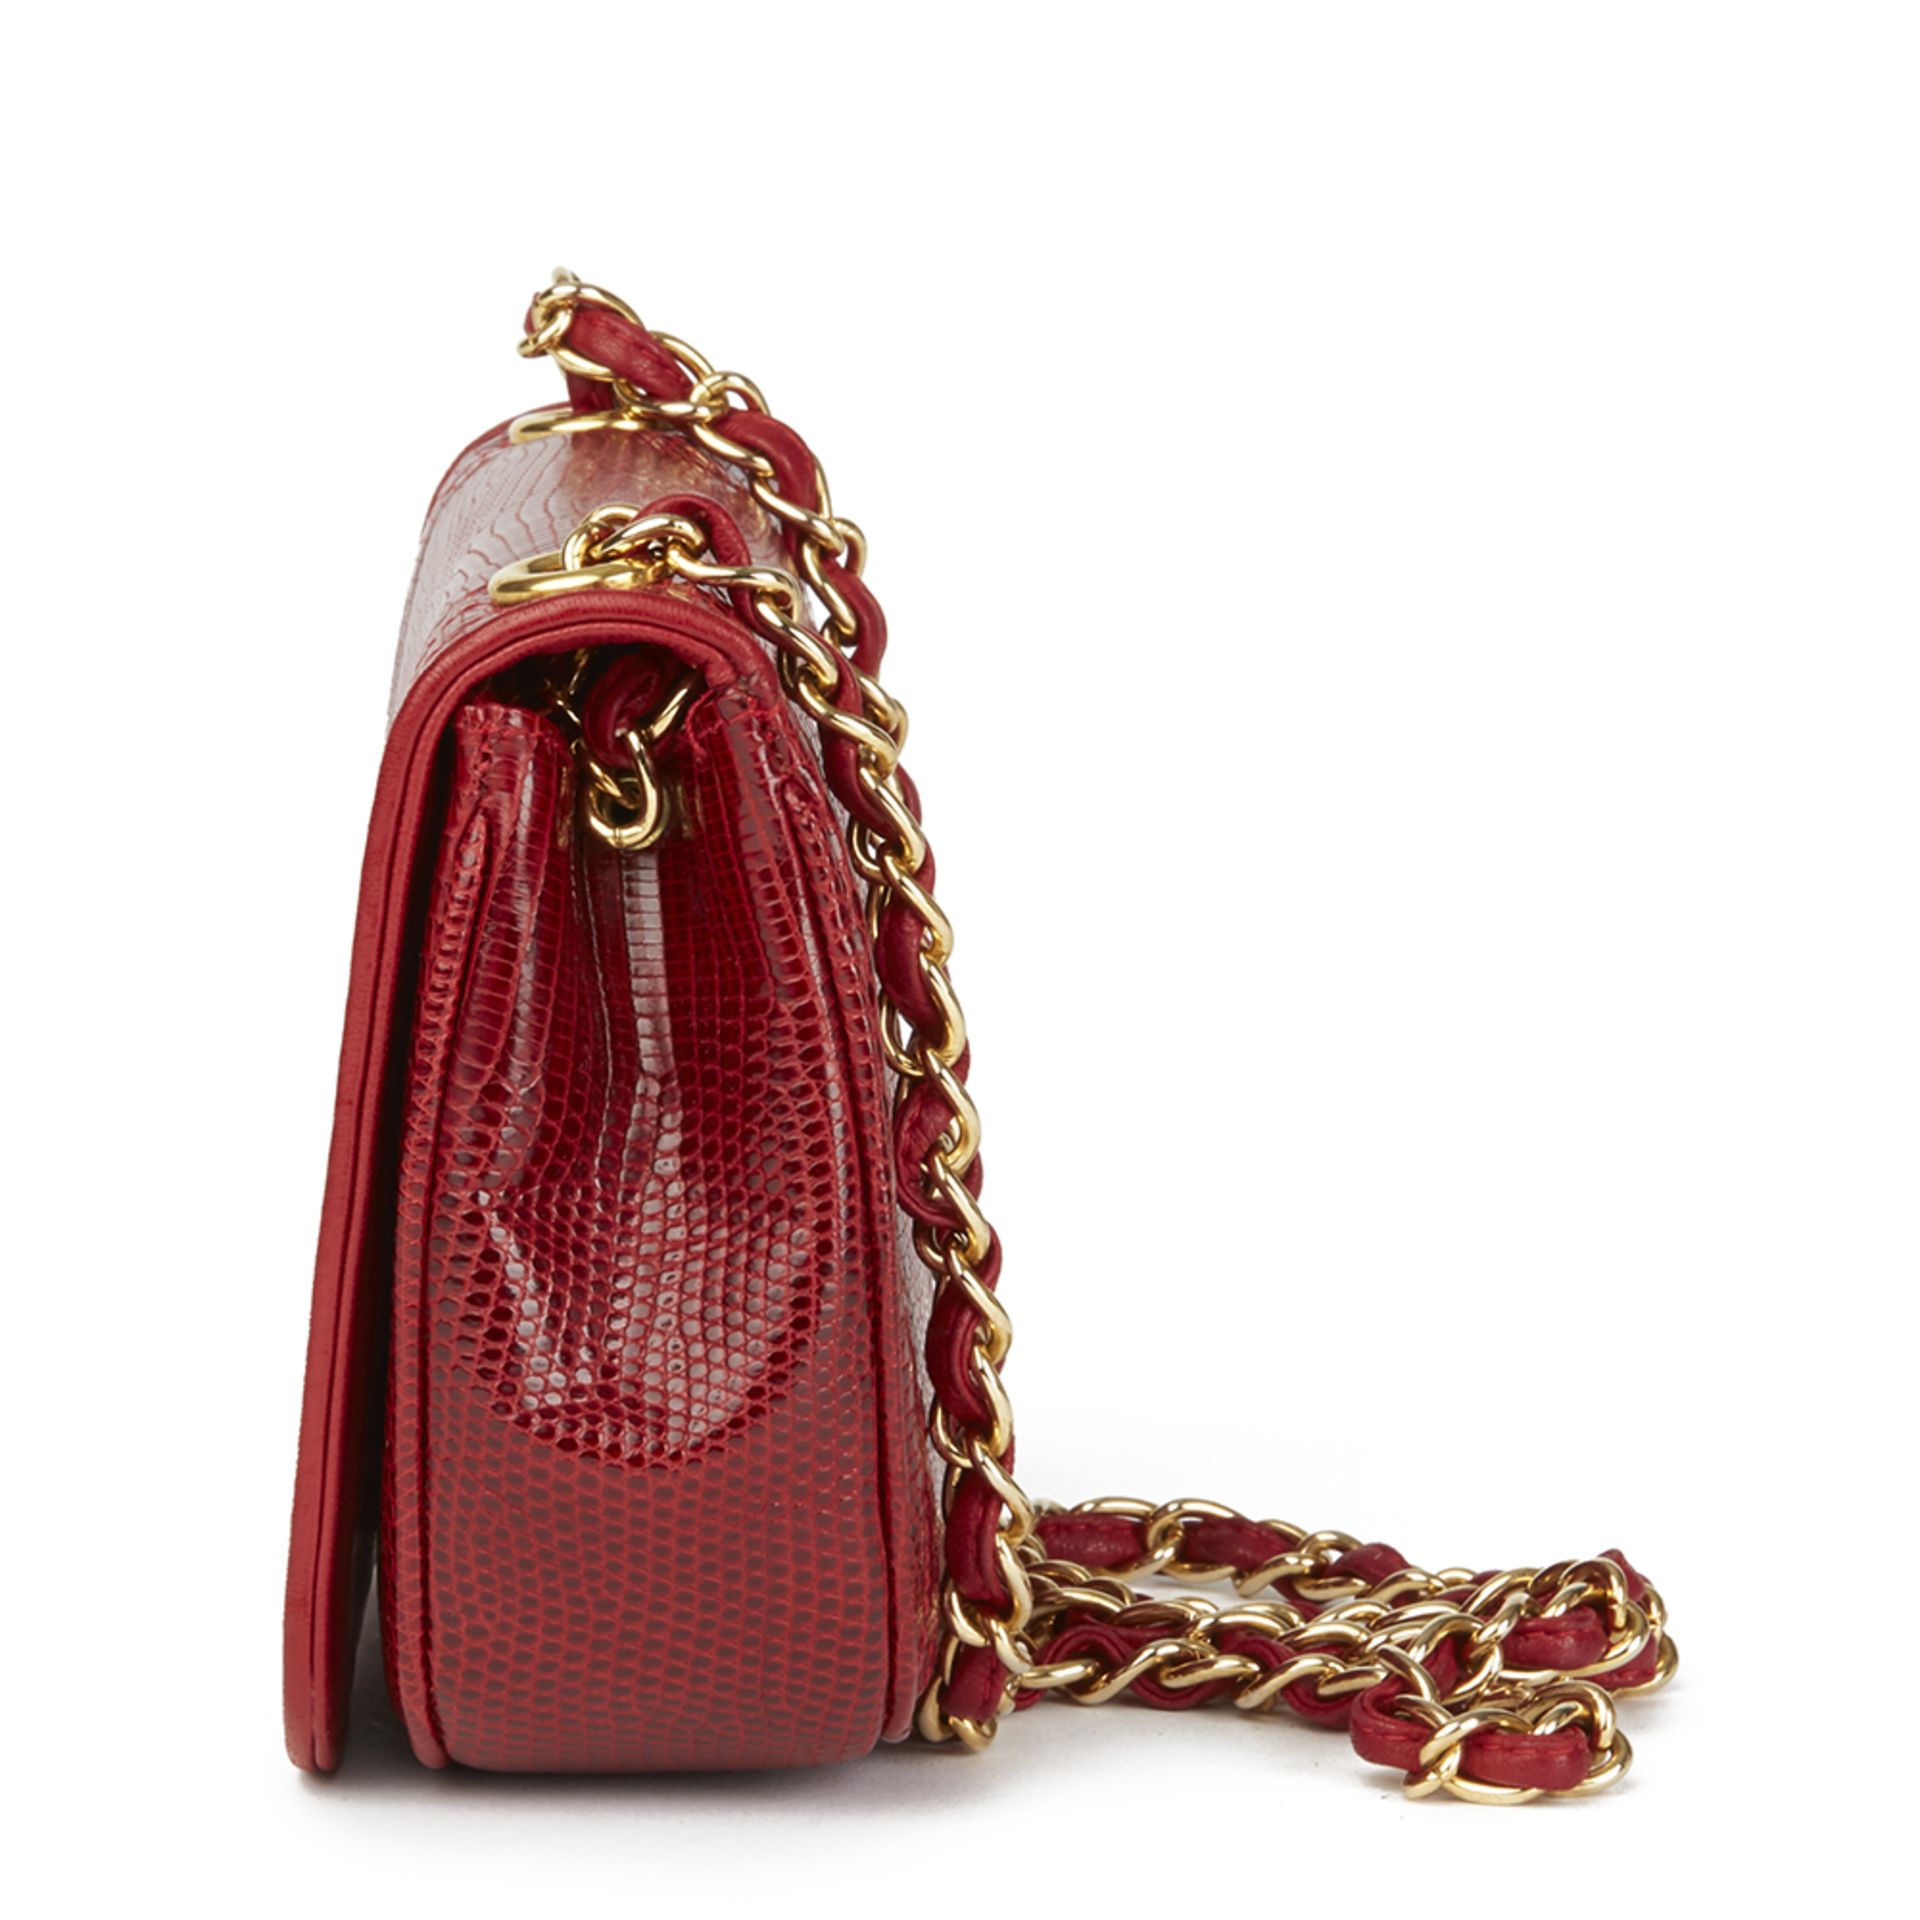 Chanel Red Lizard Leather Vintage Timeless Mini Flap Bag - Image 12 of 12